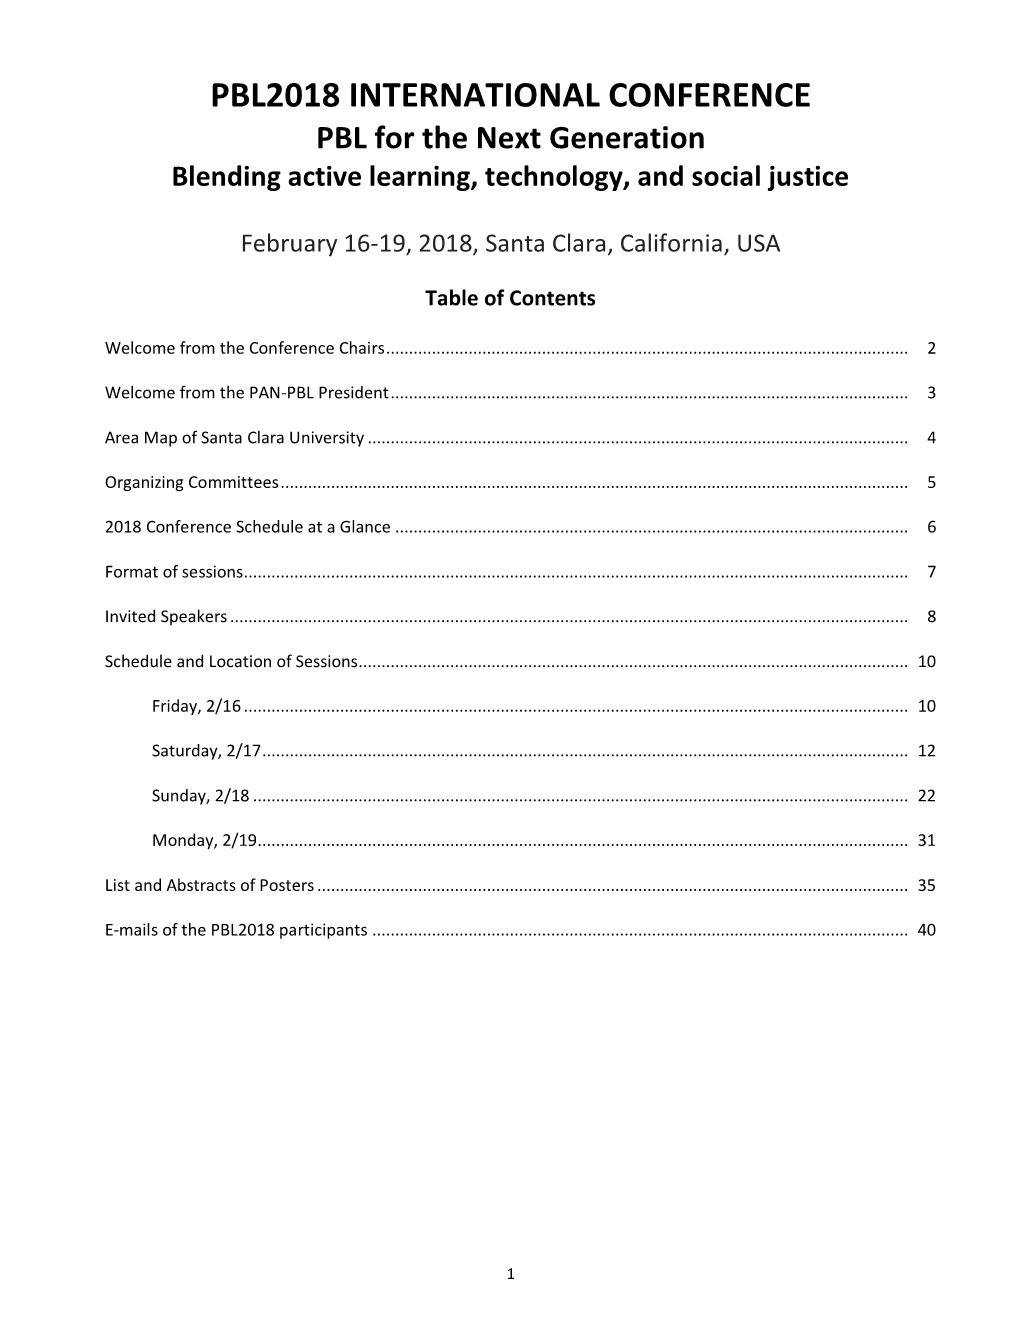 PBL2018 INTERNATIONAL CONFERENCE PBL for the Next Generation Blending Active Learning, Technology, and Social Justice